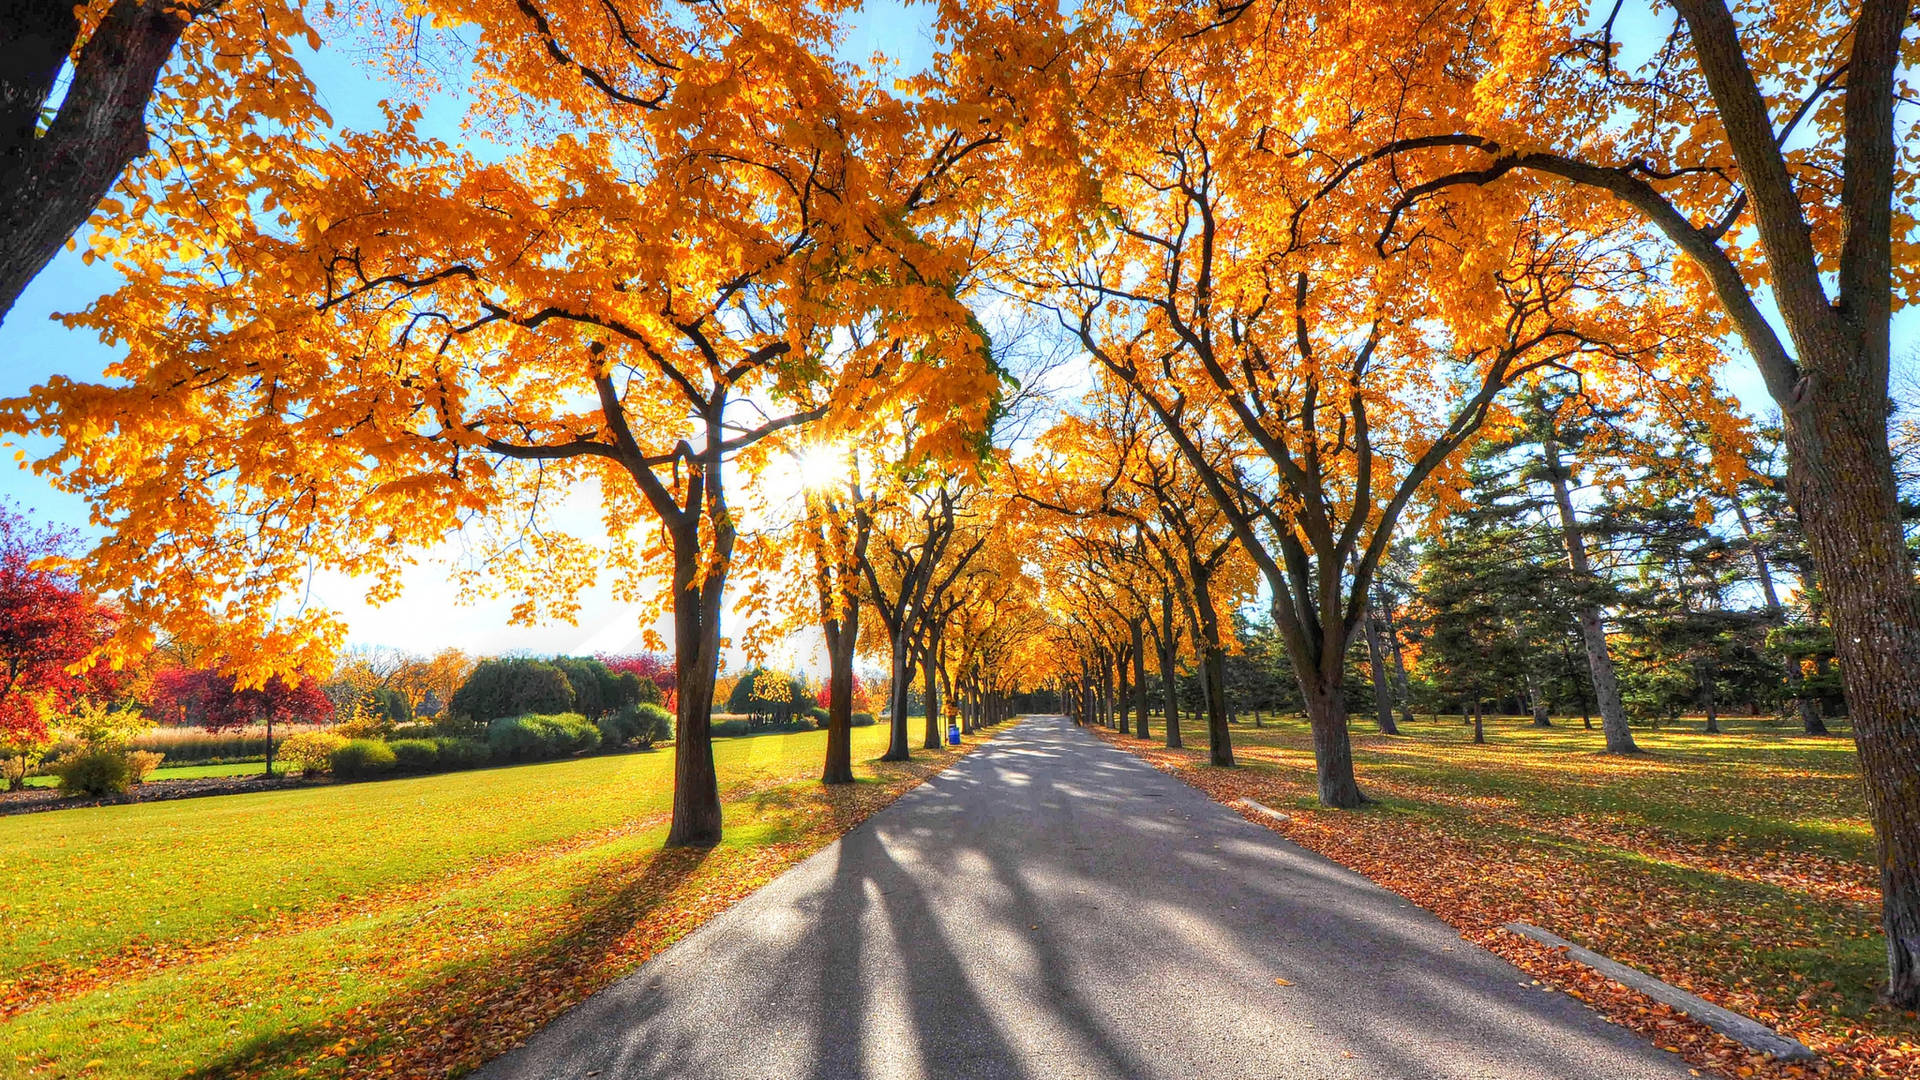 2560x1440 Fall Park With Maple Trees Wallpaper